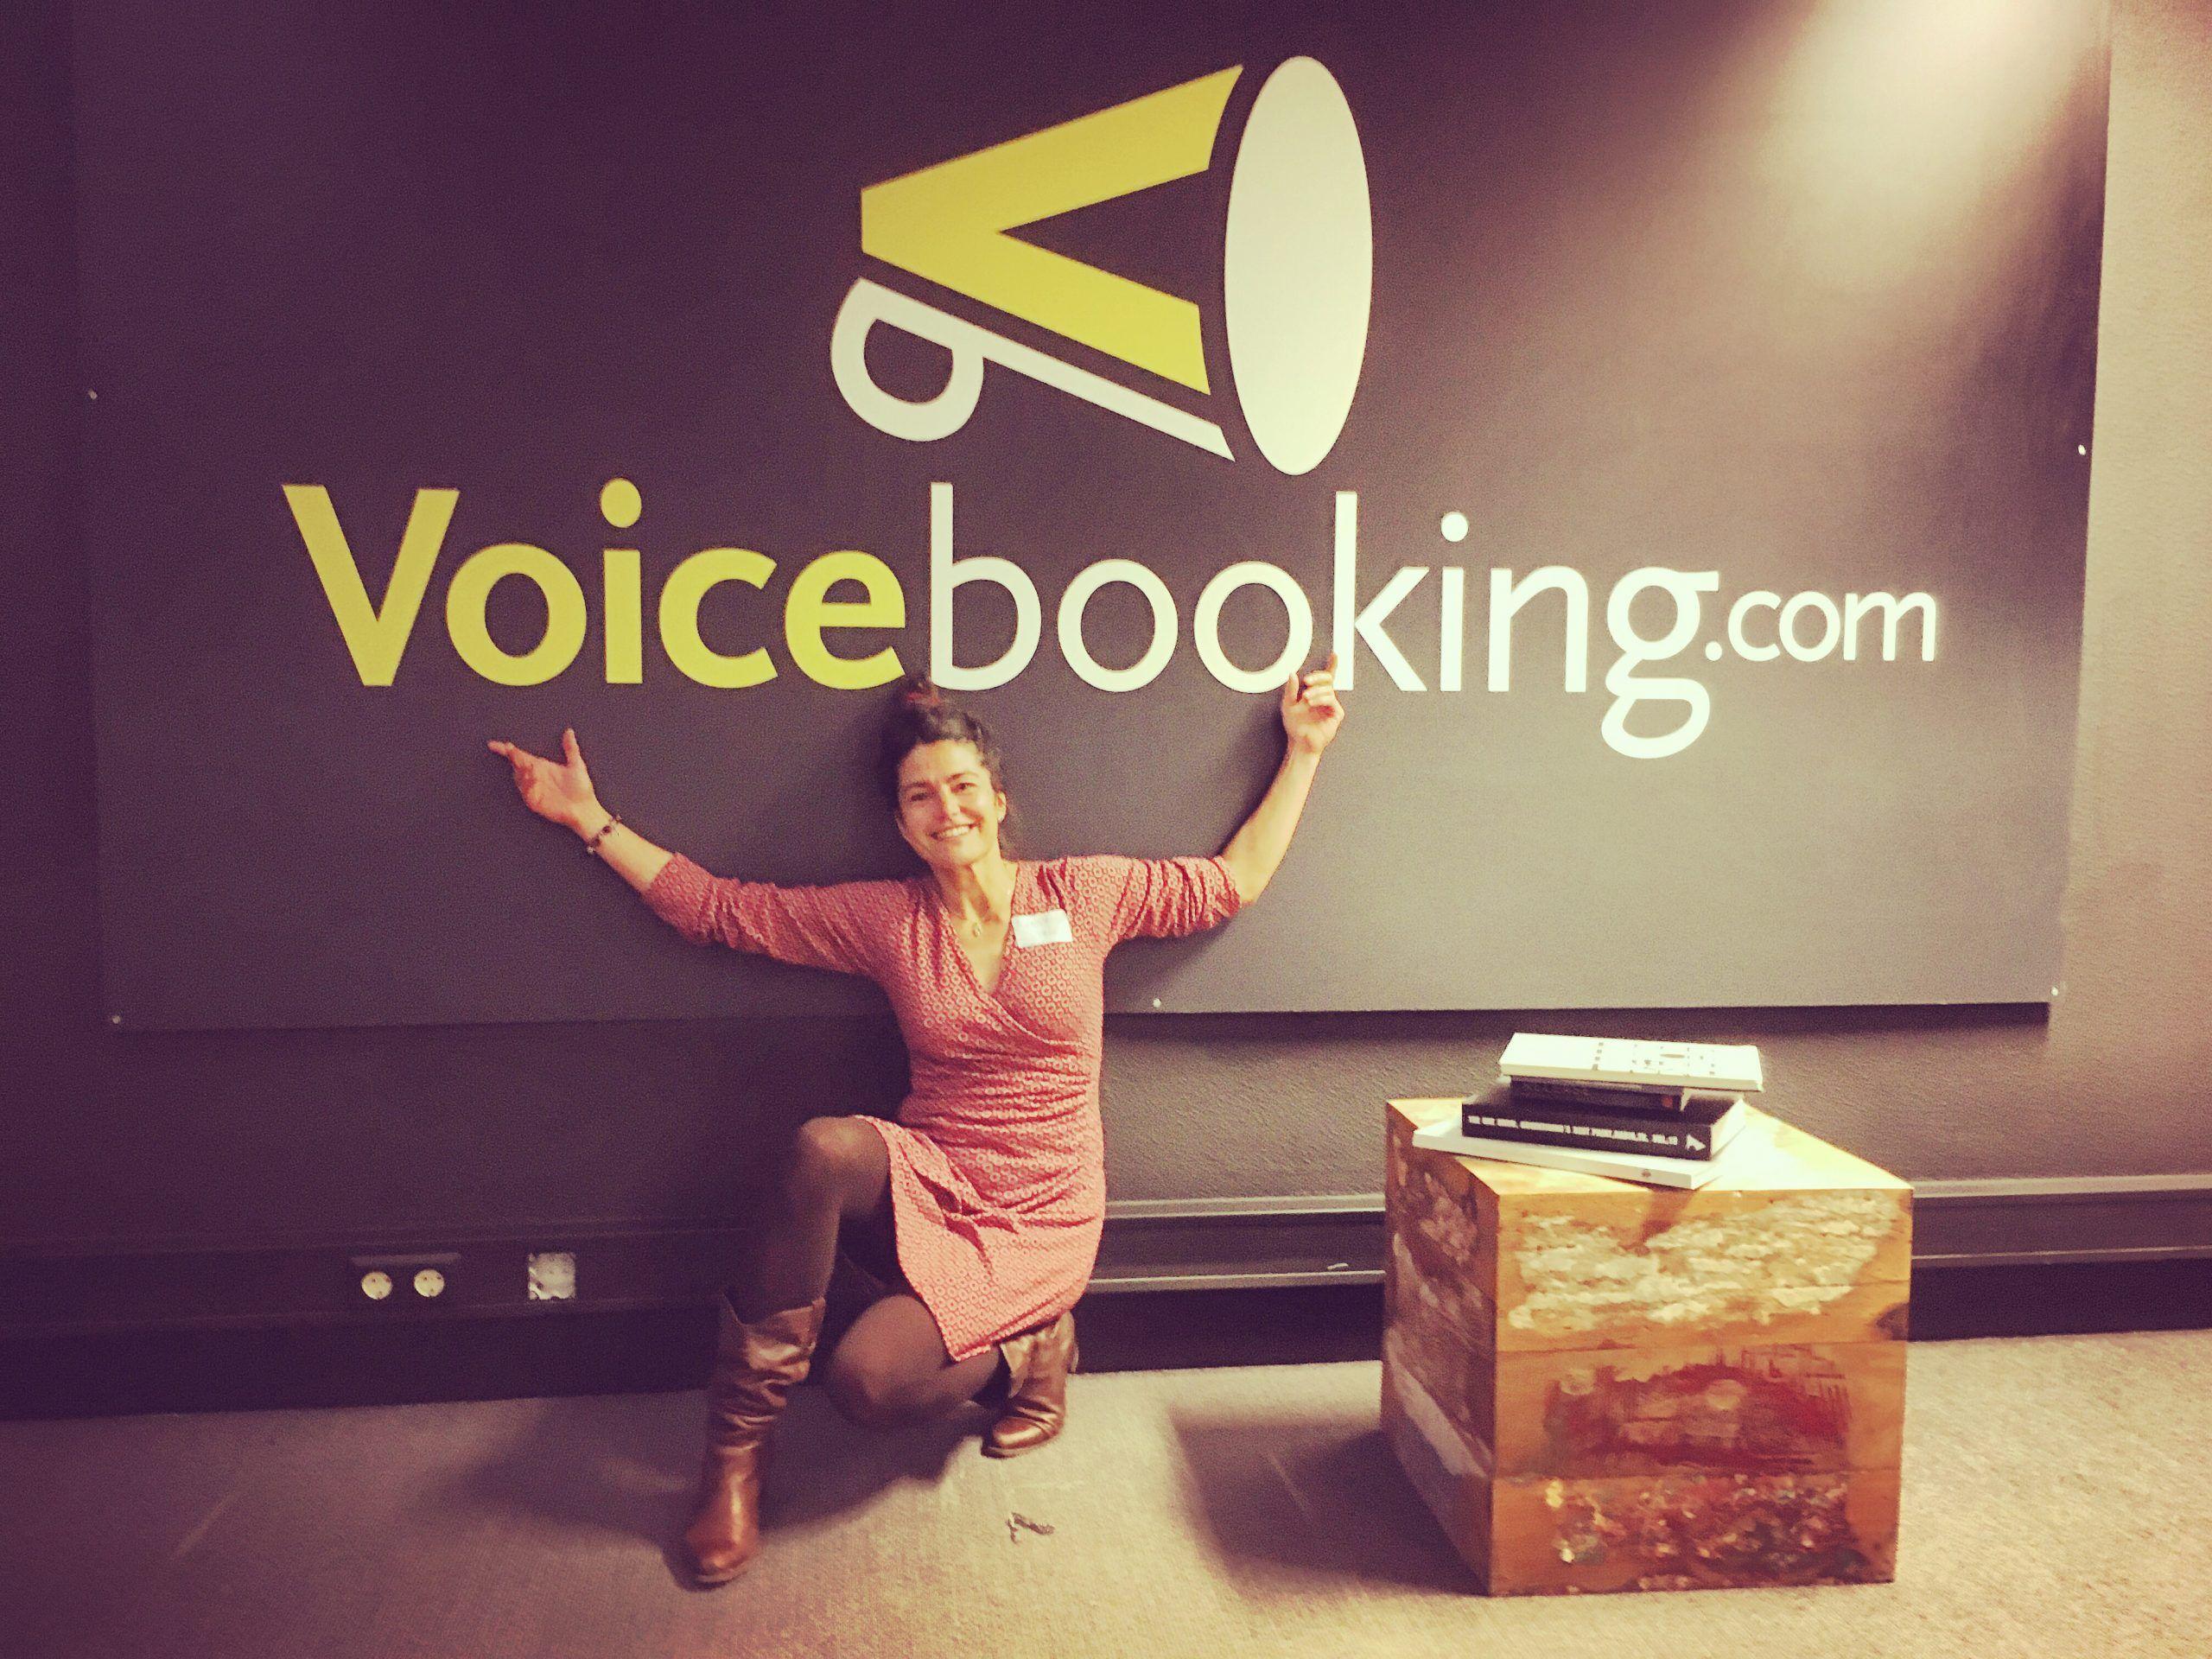 ¿Why do clients hire me as their Spanish Voice over online?